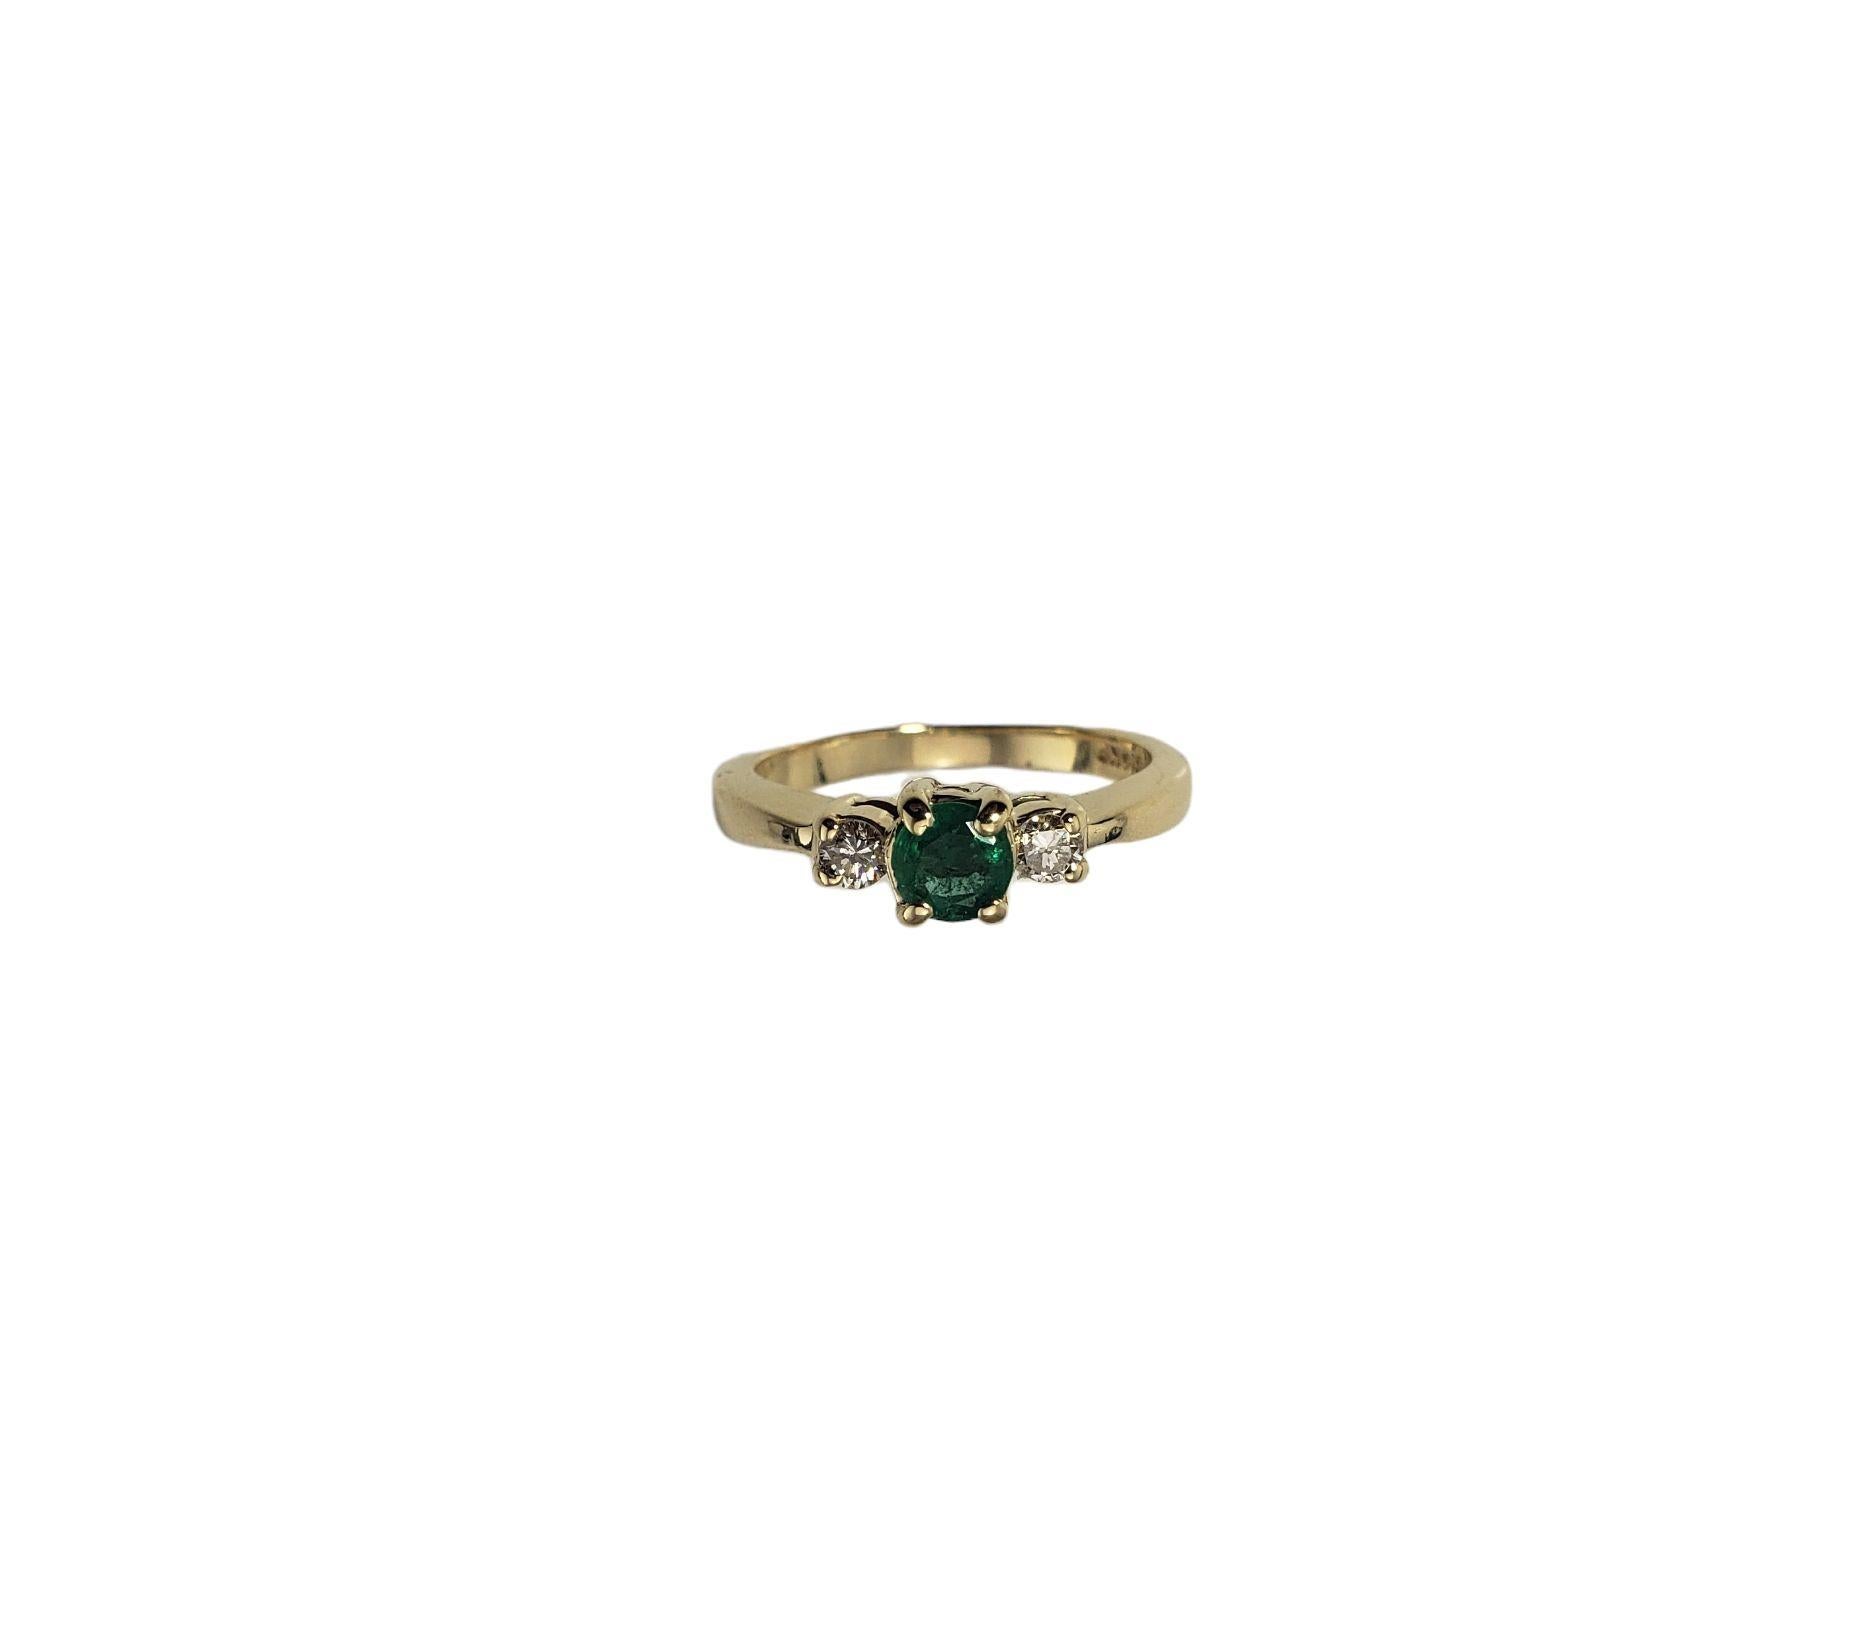 Vintage 14 Karat Yellow Gold Emerald and Diamond Ring Size 5.25-

This lovely ring features one round emerald (5 mm) and two round brilliant cut diamonds set in 14K yellow gold. Shank: 2 mm.

Approximate total diamond weight: .12 ct.

Diamond